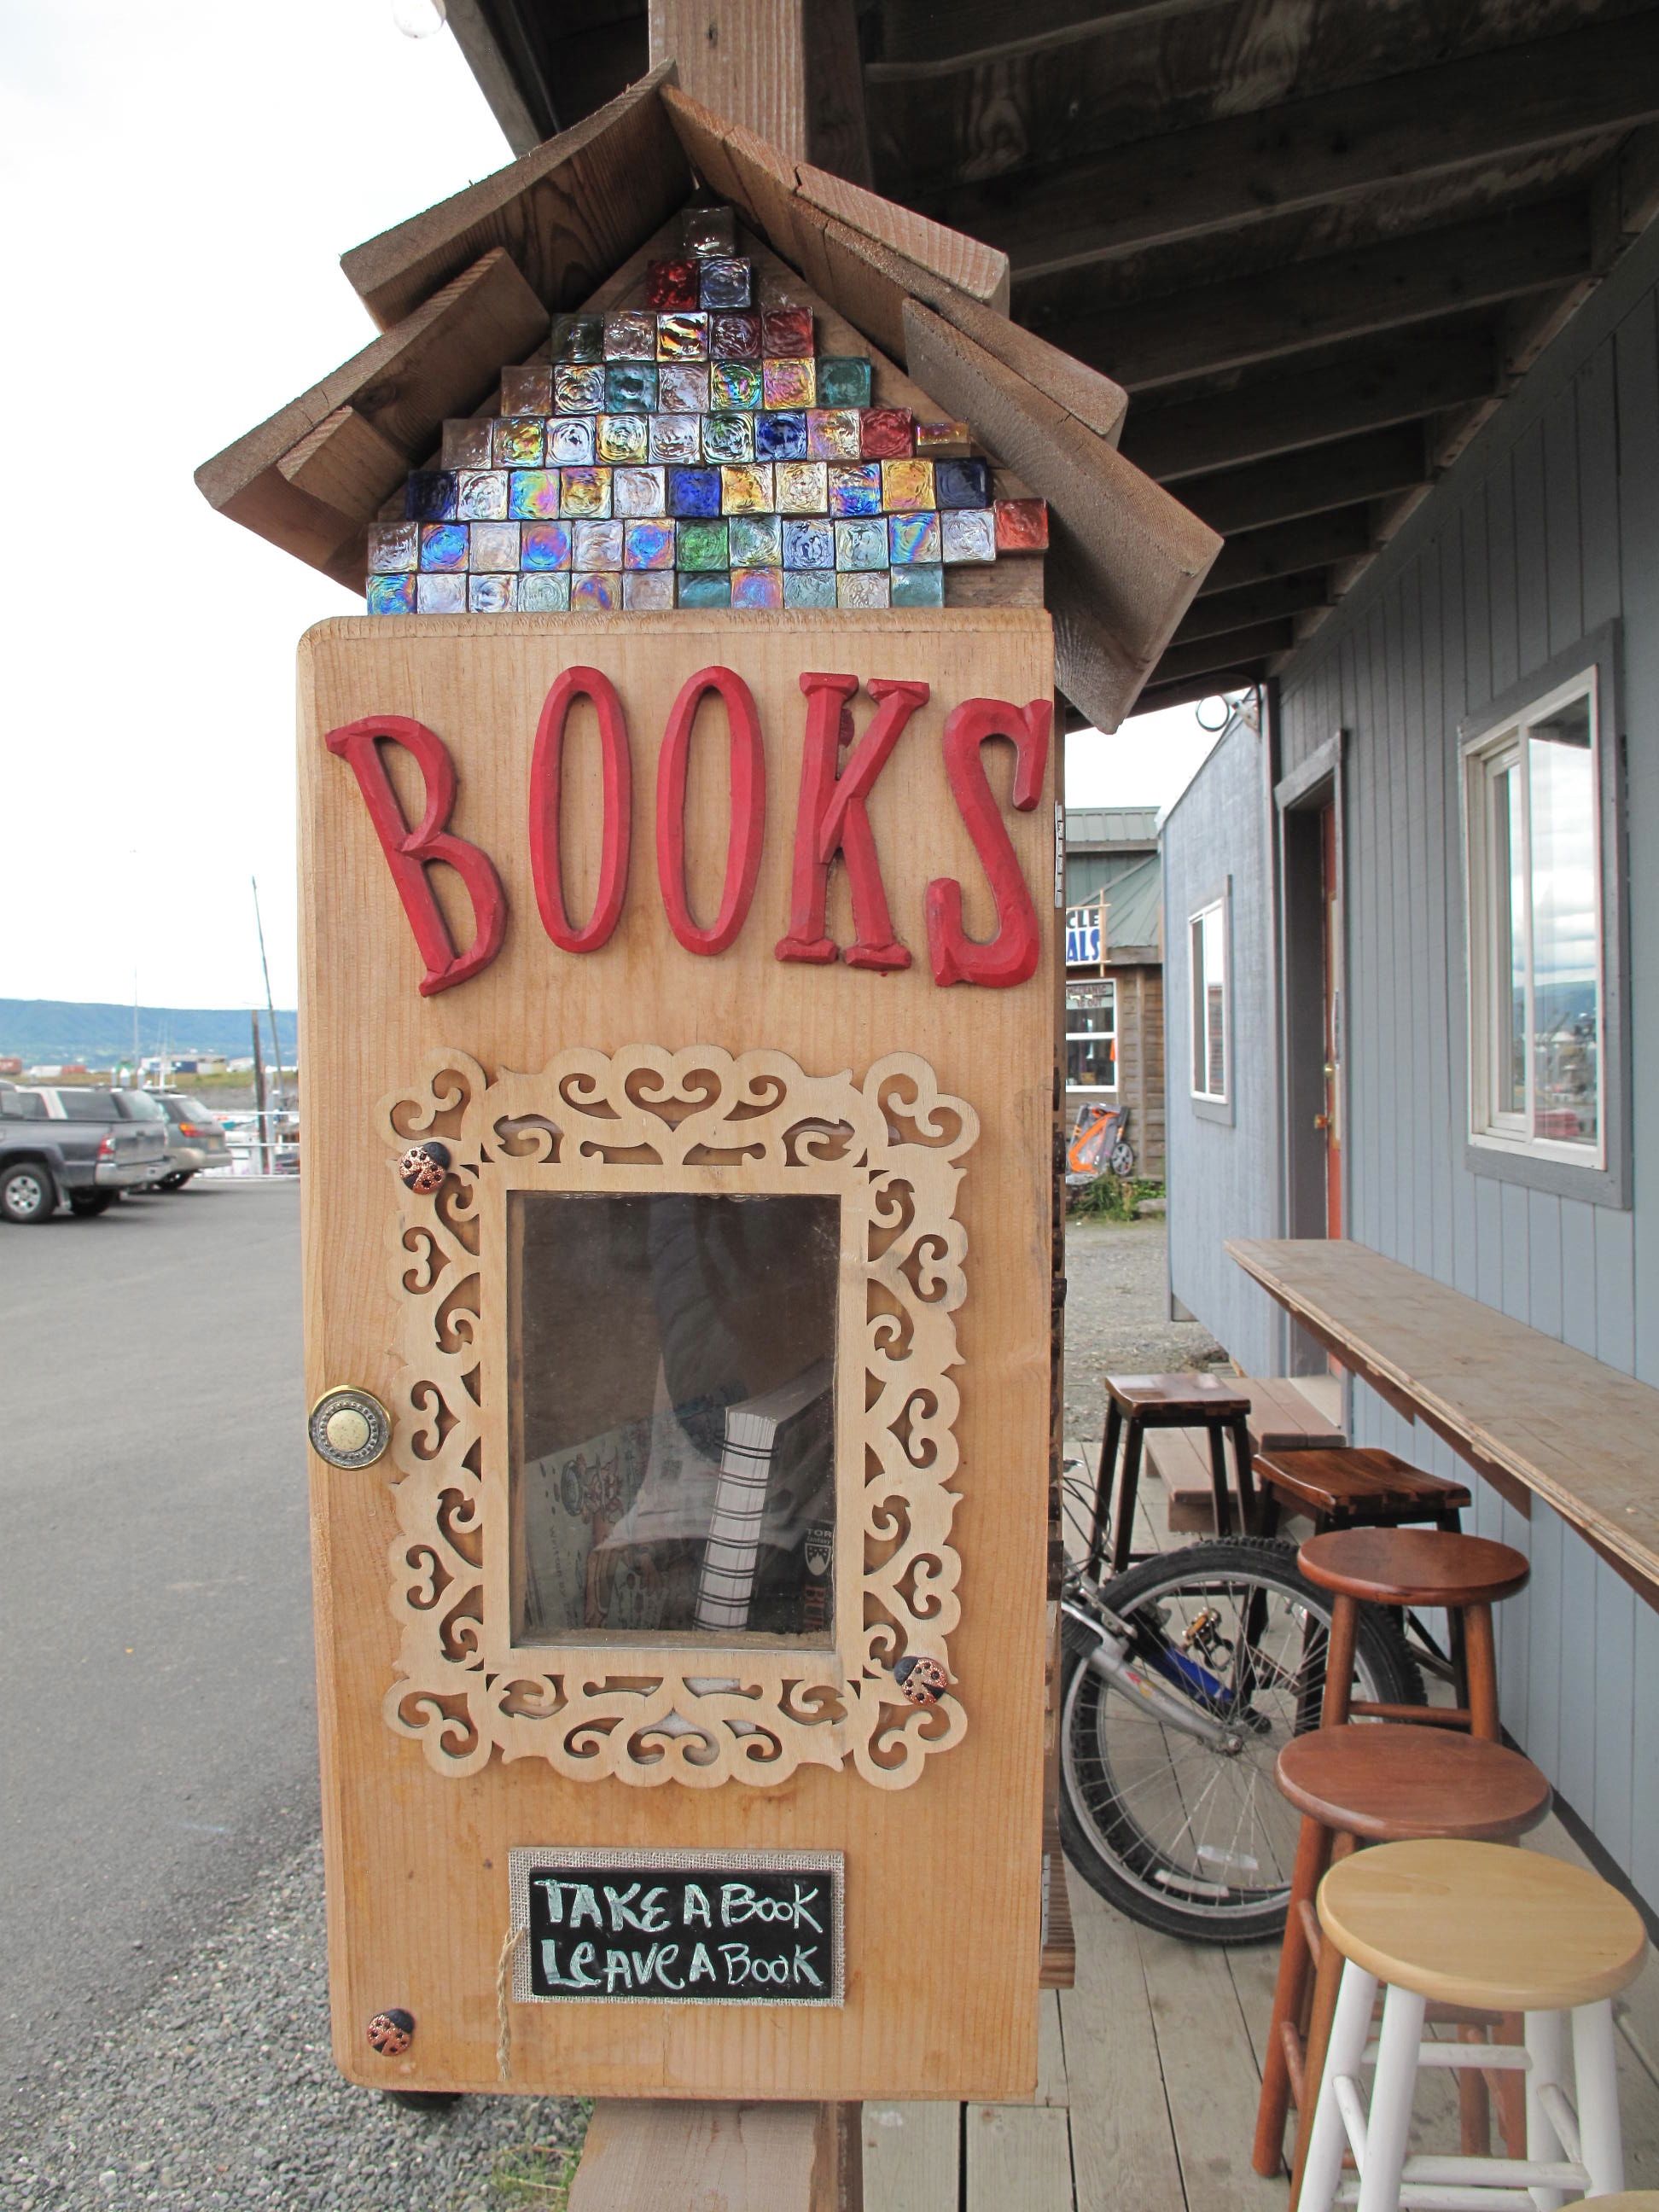 Take a book or leave a book at the micro-library outside La Baleine Cafe.-Photo by Miranda Weiss